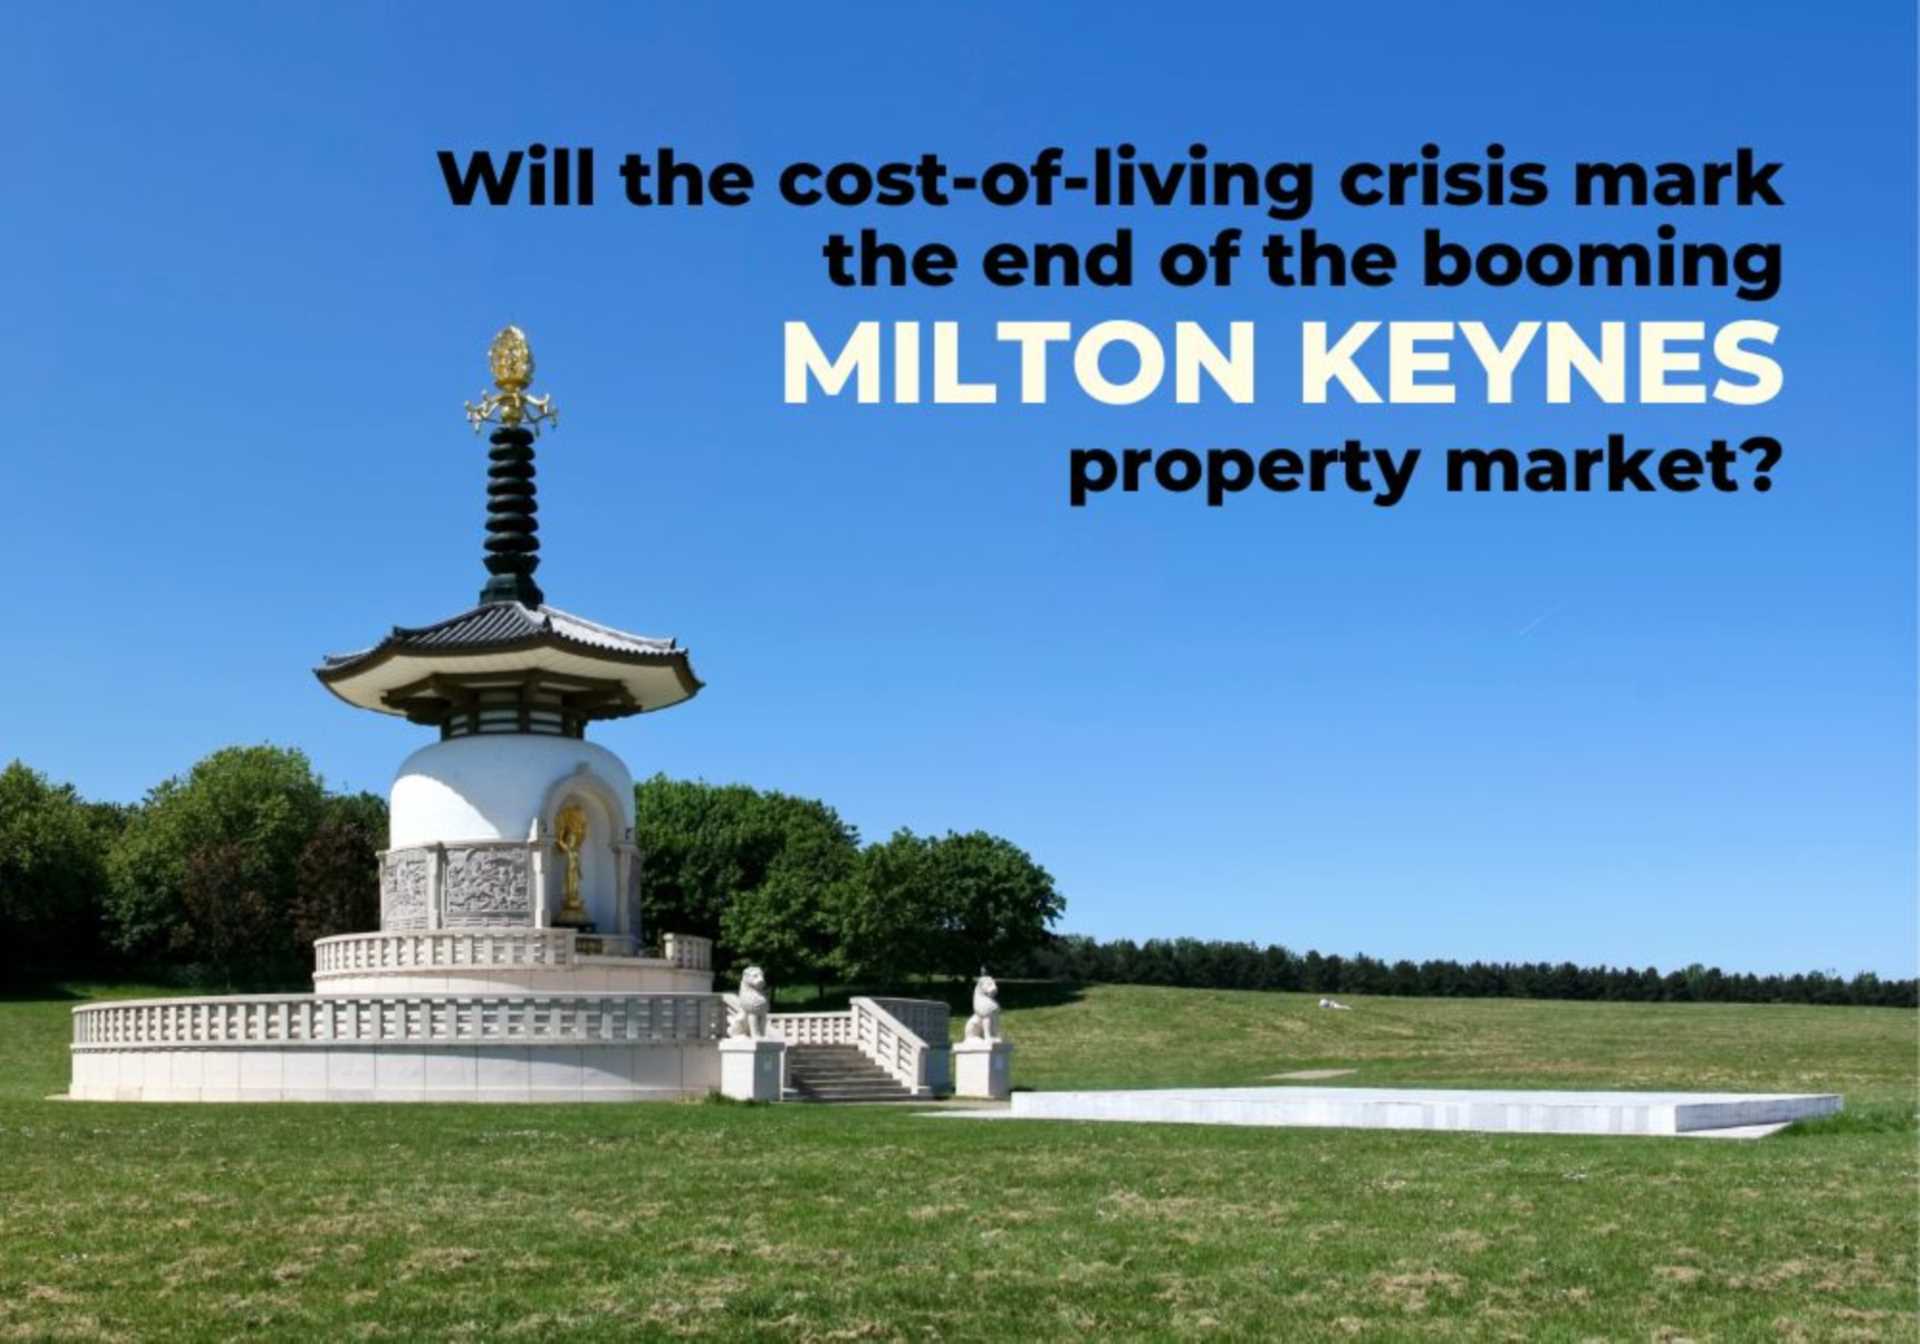 Will The Cost-of-Living Crisis Mark the End of the Booming Milton Keynes Property Market?